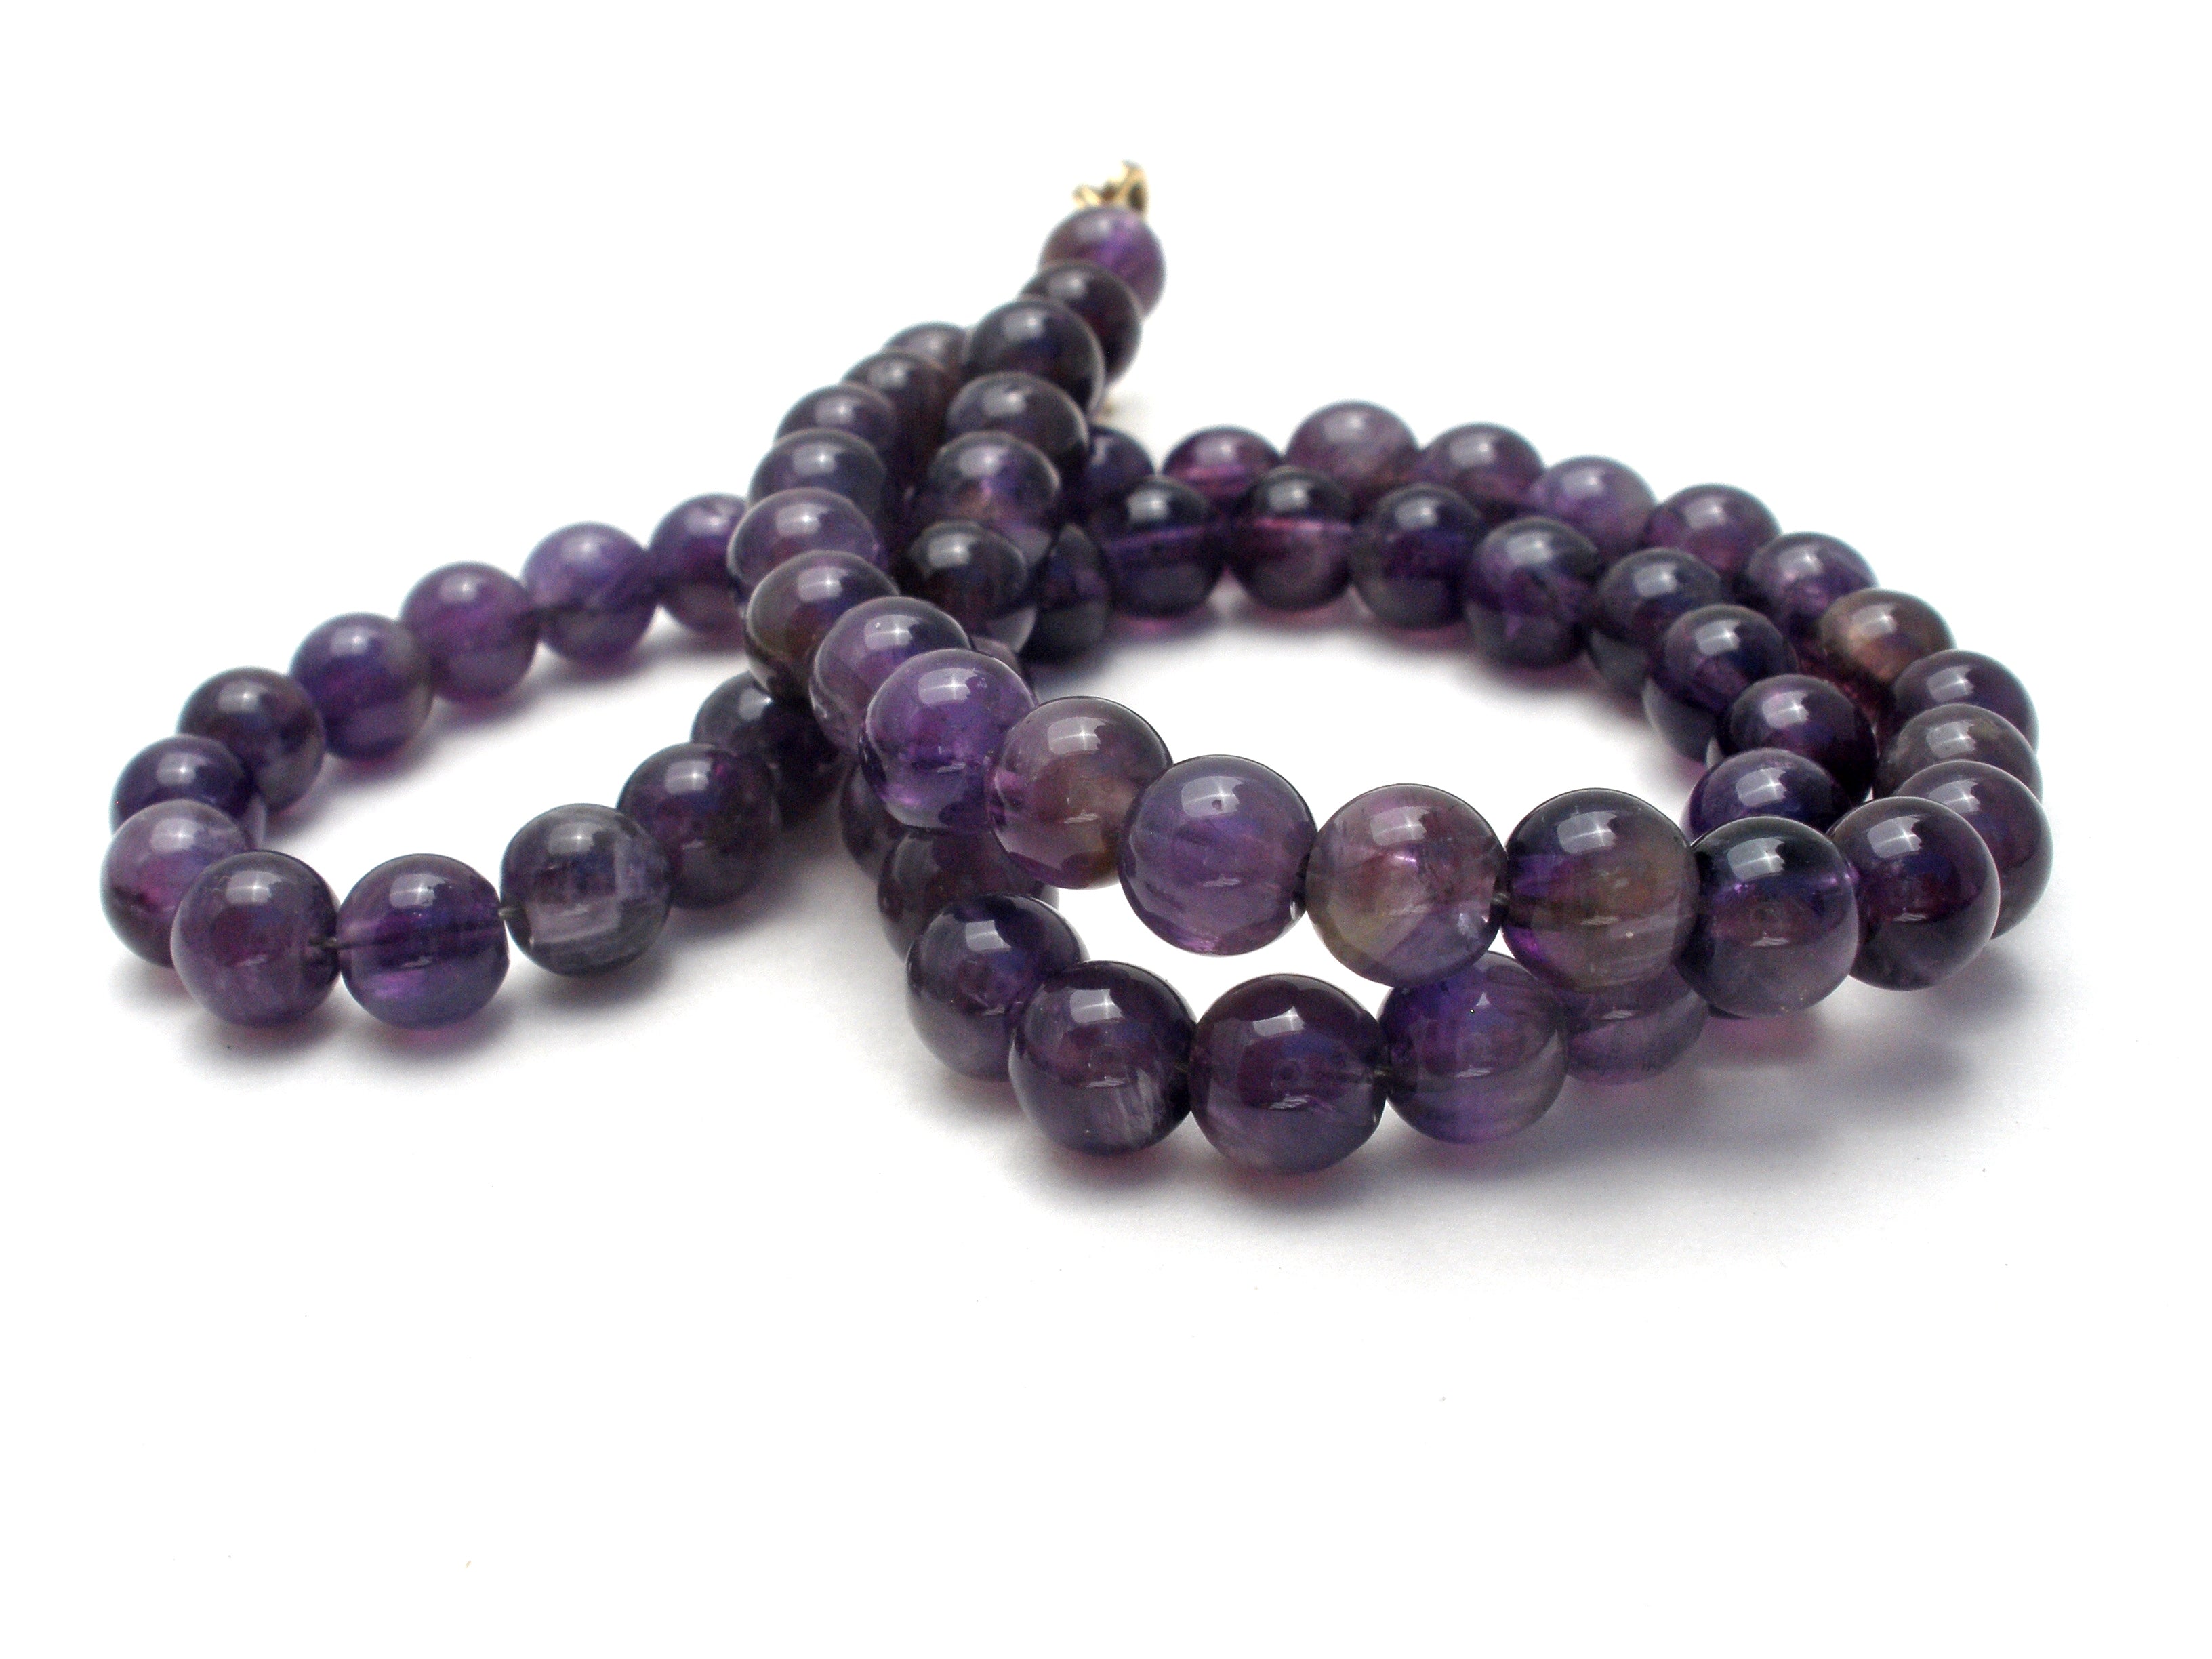 Wholesale A 100% Natural Purple Amethysts Crystal Stone Beads For Jewelry  Making DIY Bracelet Necklace 4/6/8/10/12mm Strand 15